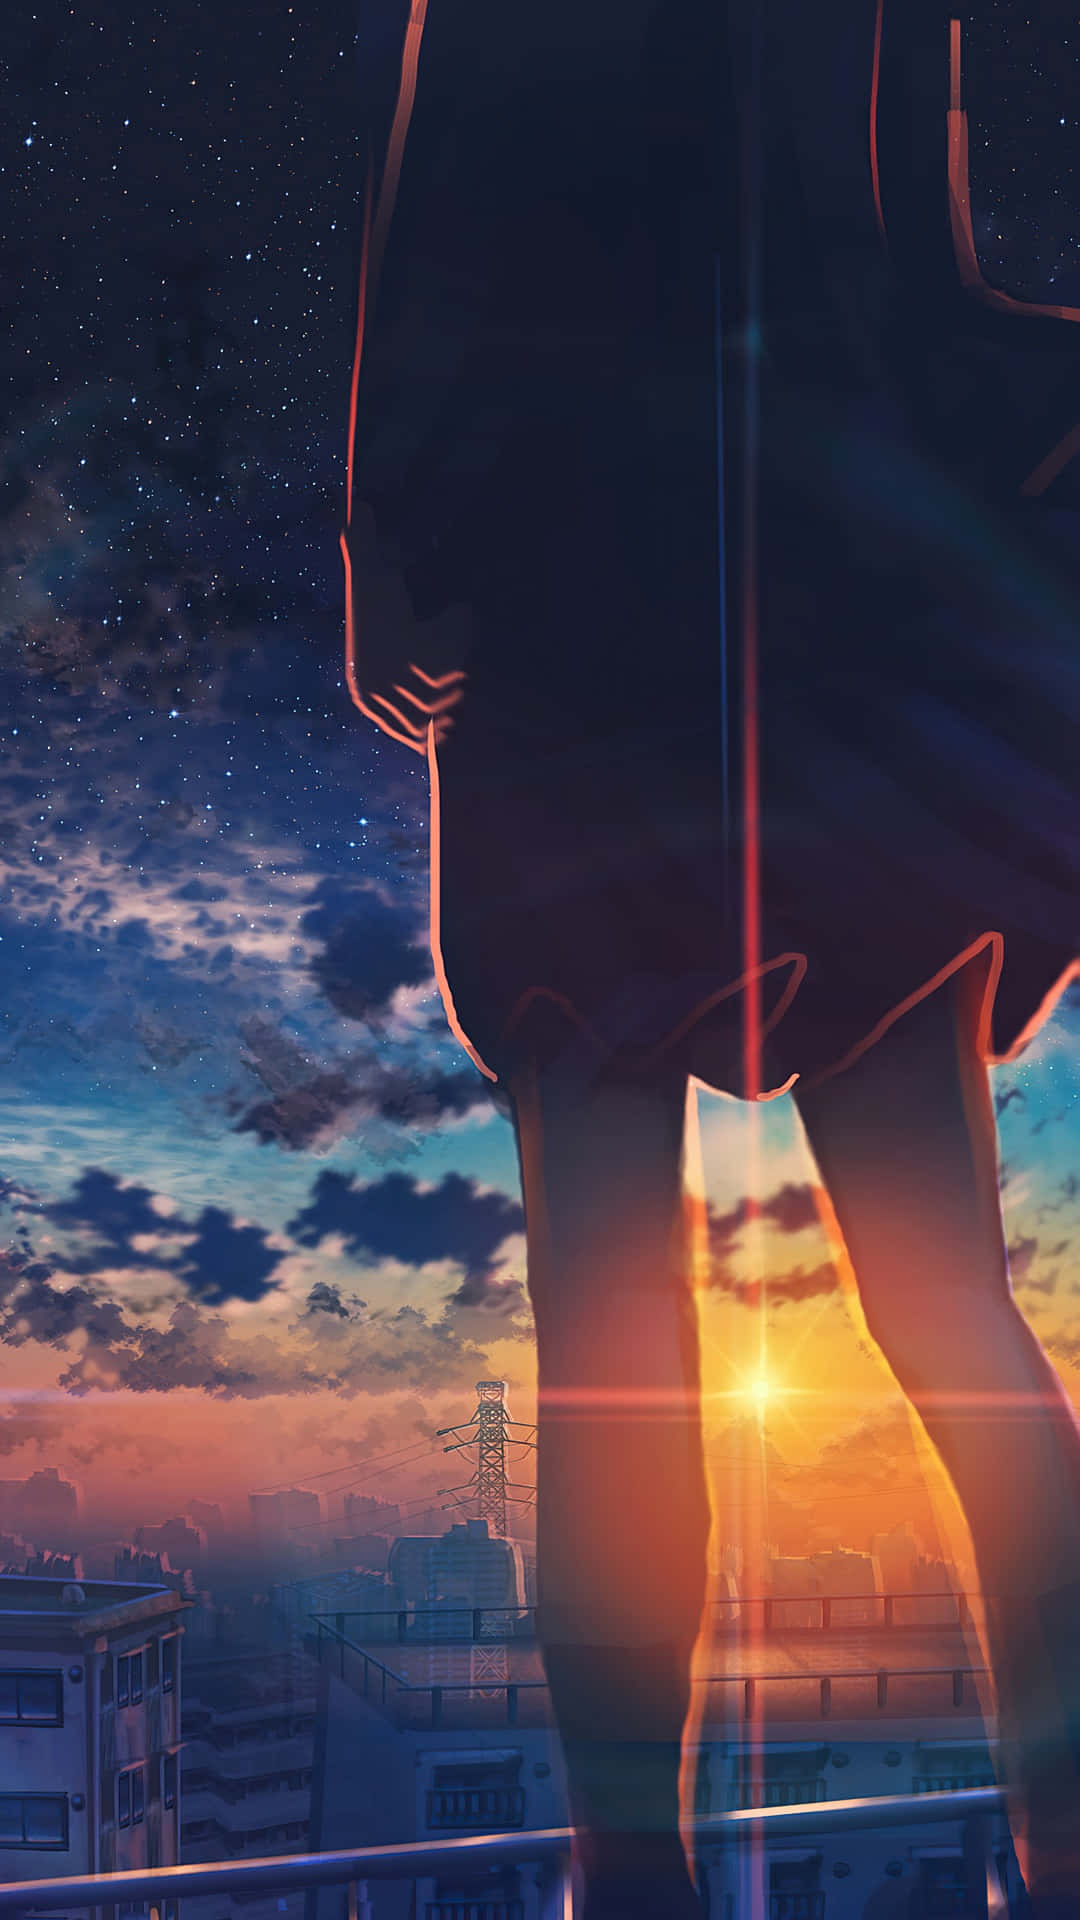 Enjoy the anime sunset in an iPhone experience. Wallpaper